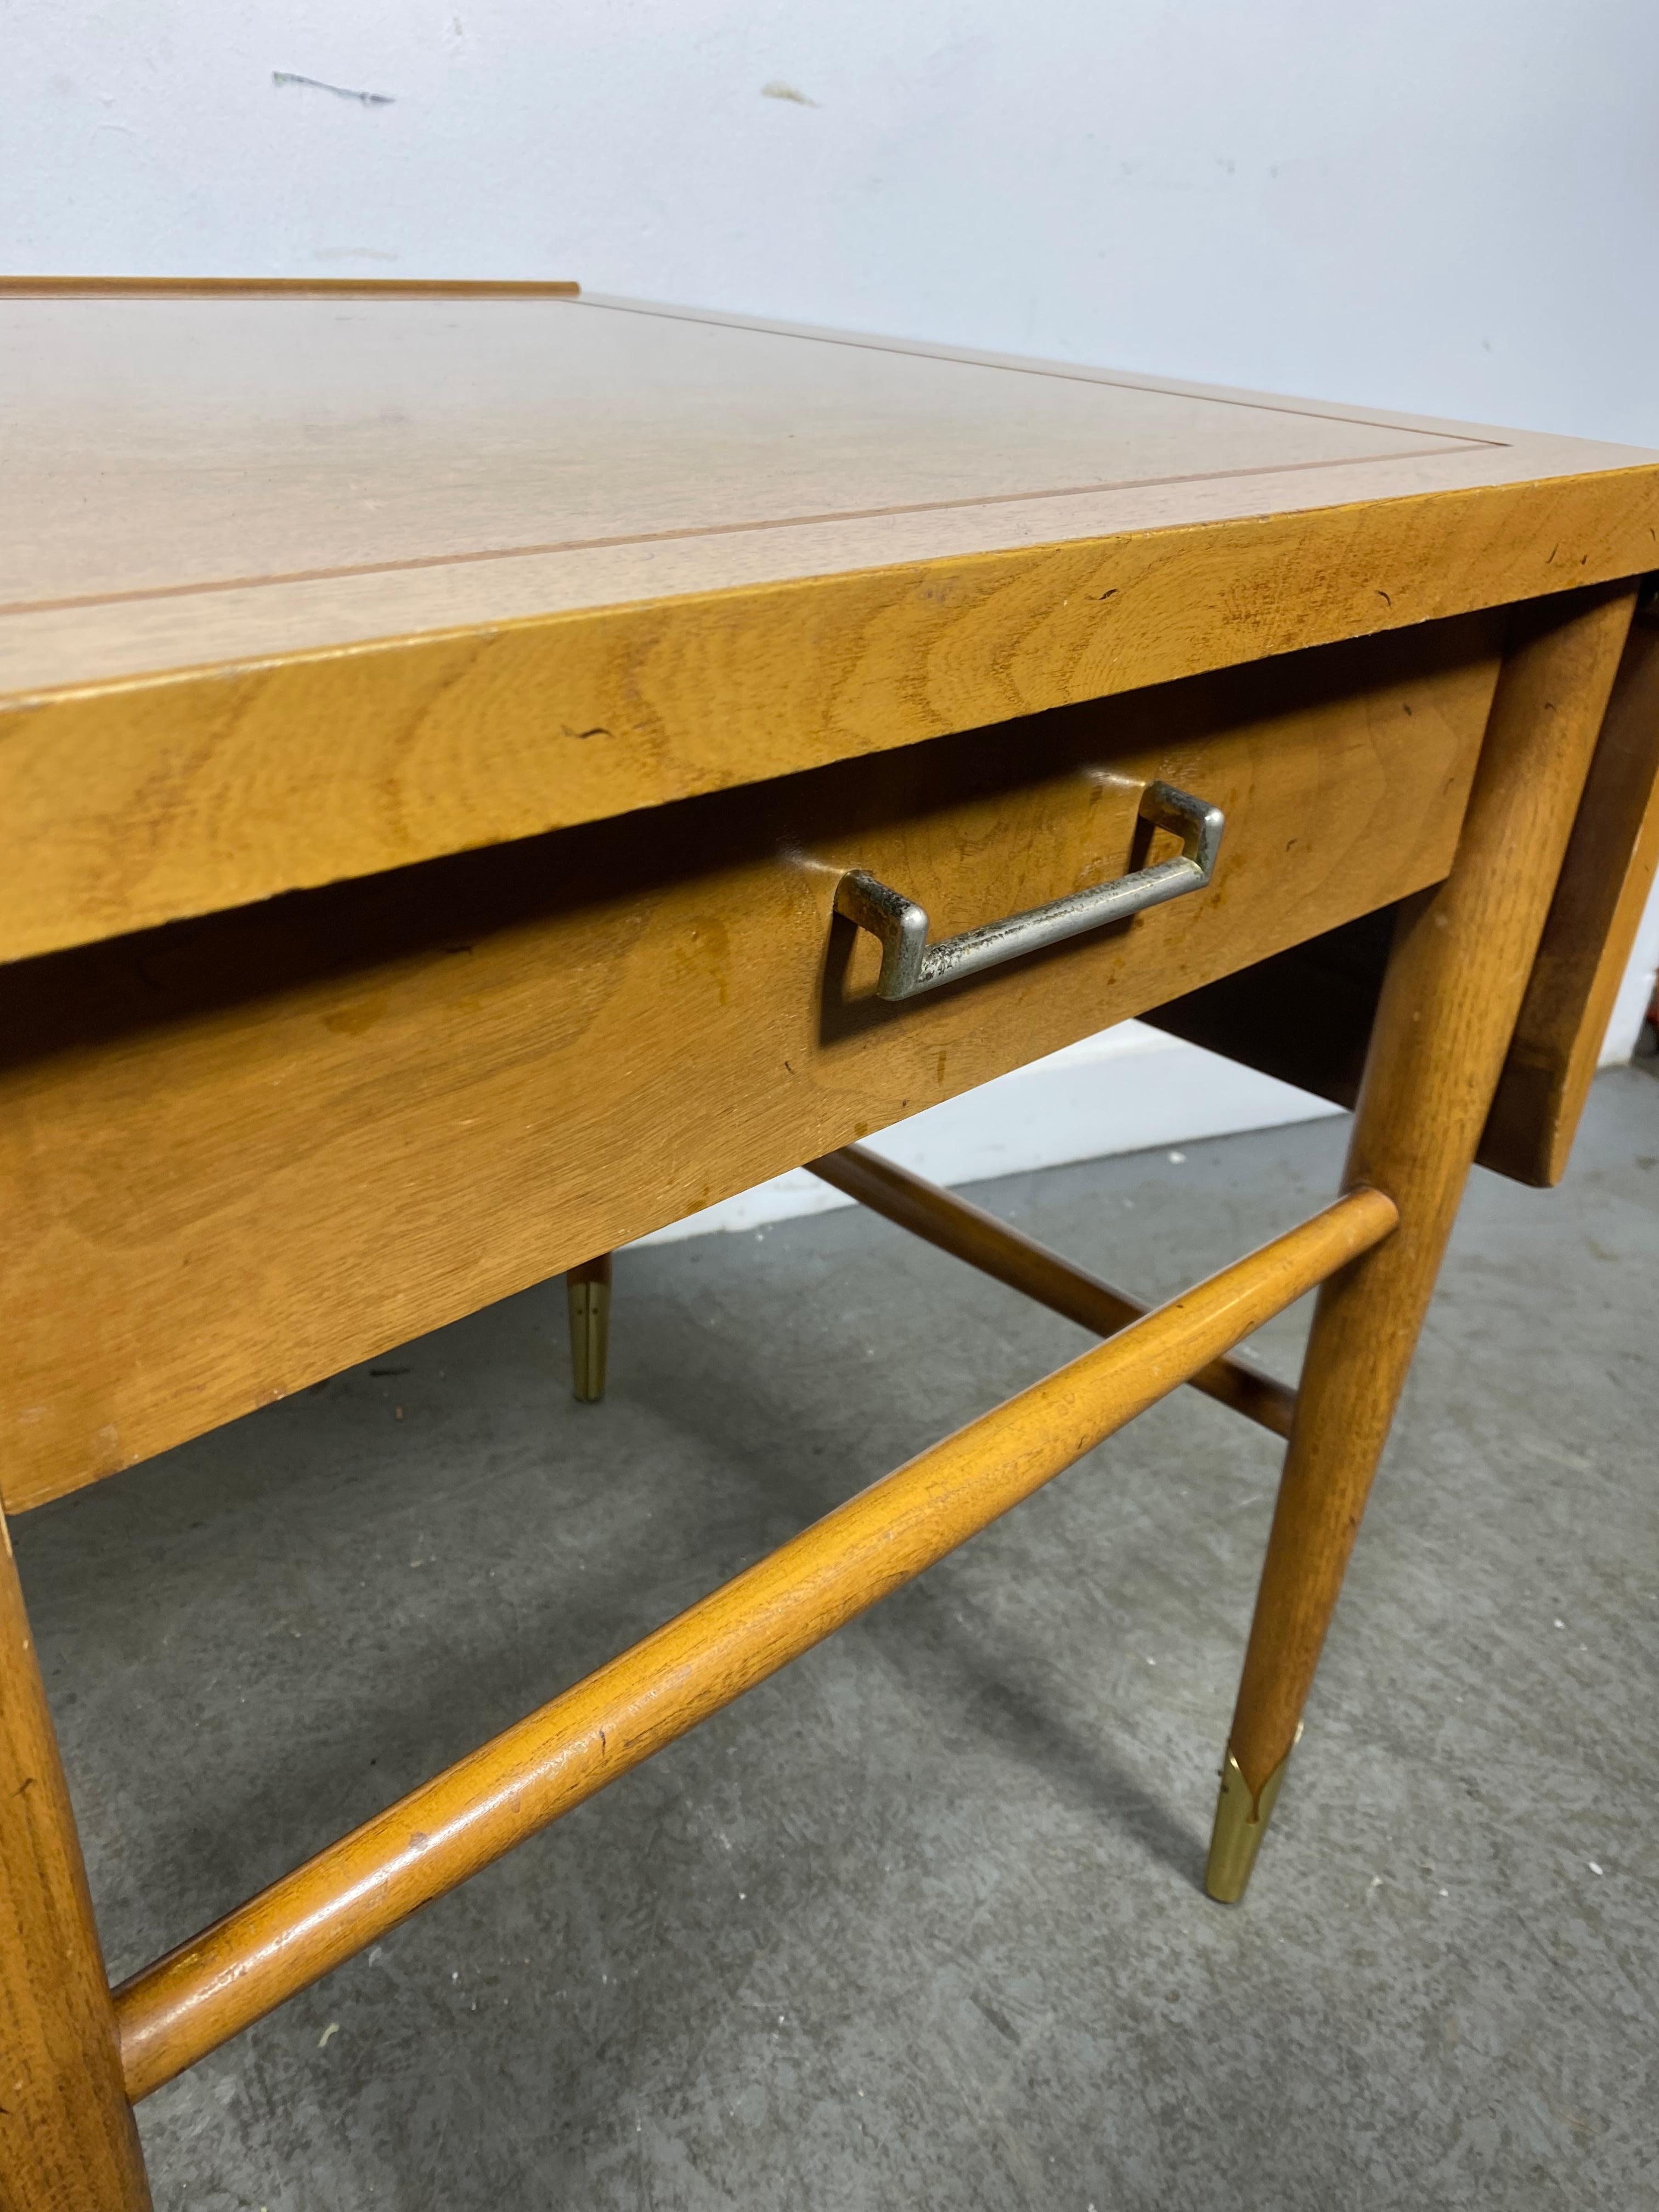 A drop leaf side/ lamp table by Lane circa 1950s from the “Copenhagen” collection. Danish meets American modern with beautiful woods and patina, tapered legs with brass sabots.  Nice original condition. Hand delivery avail to New York City or